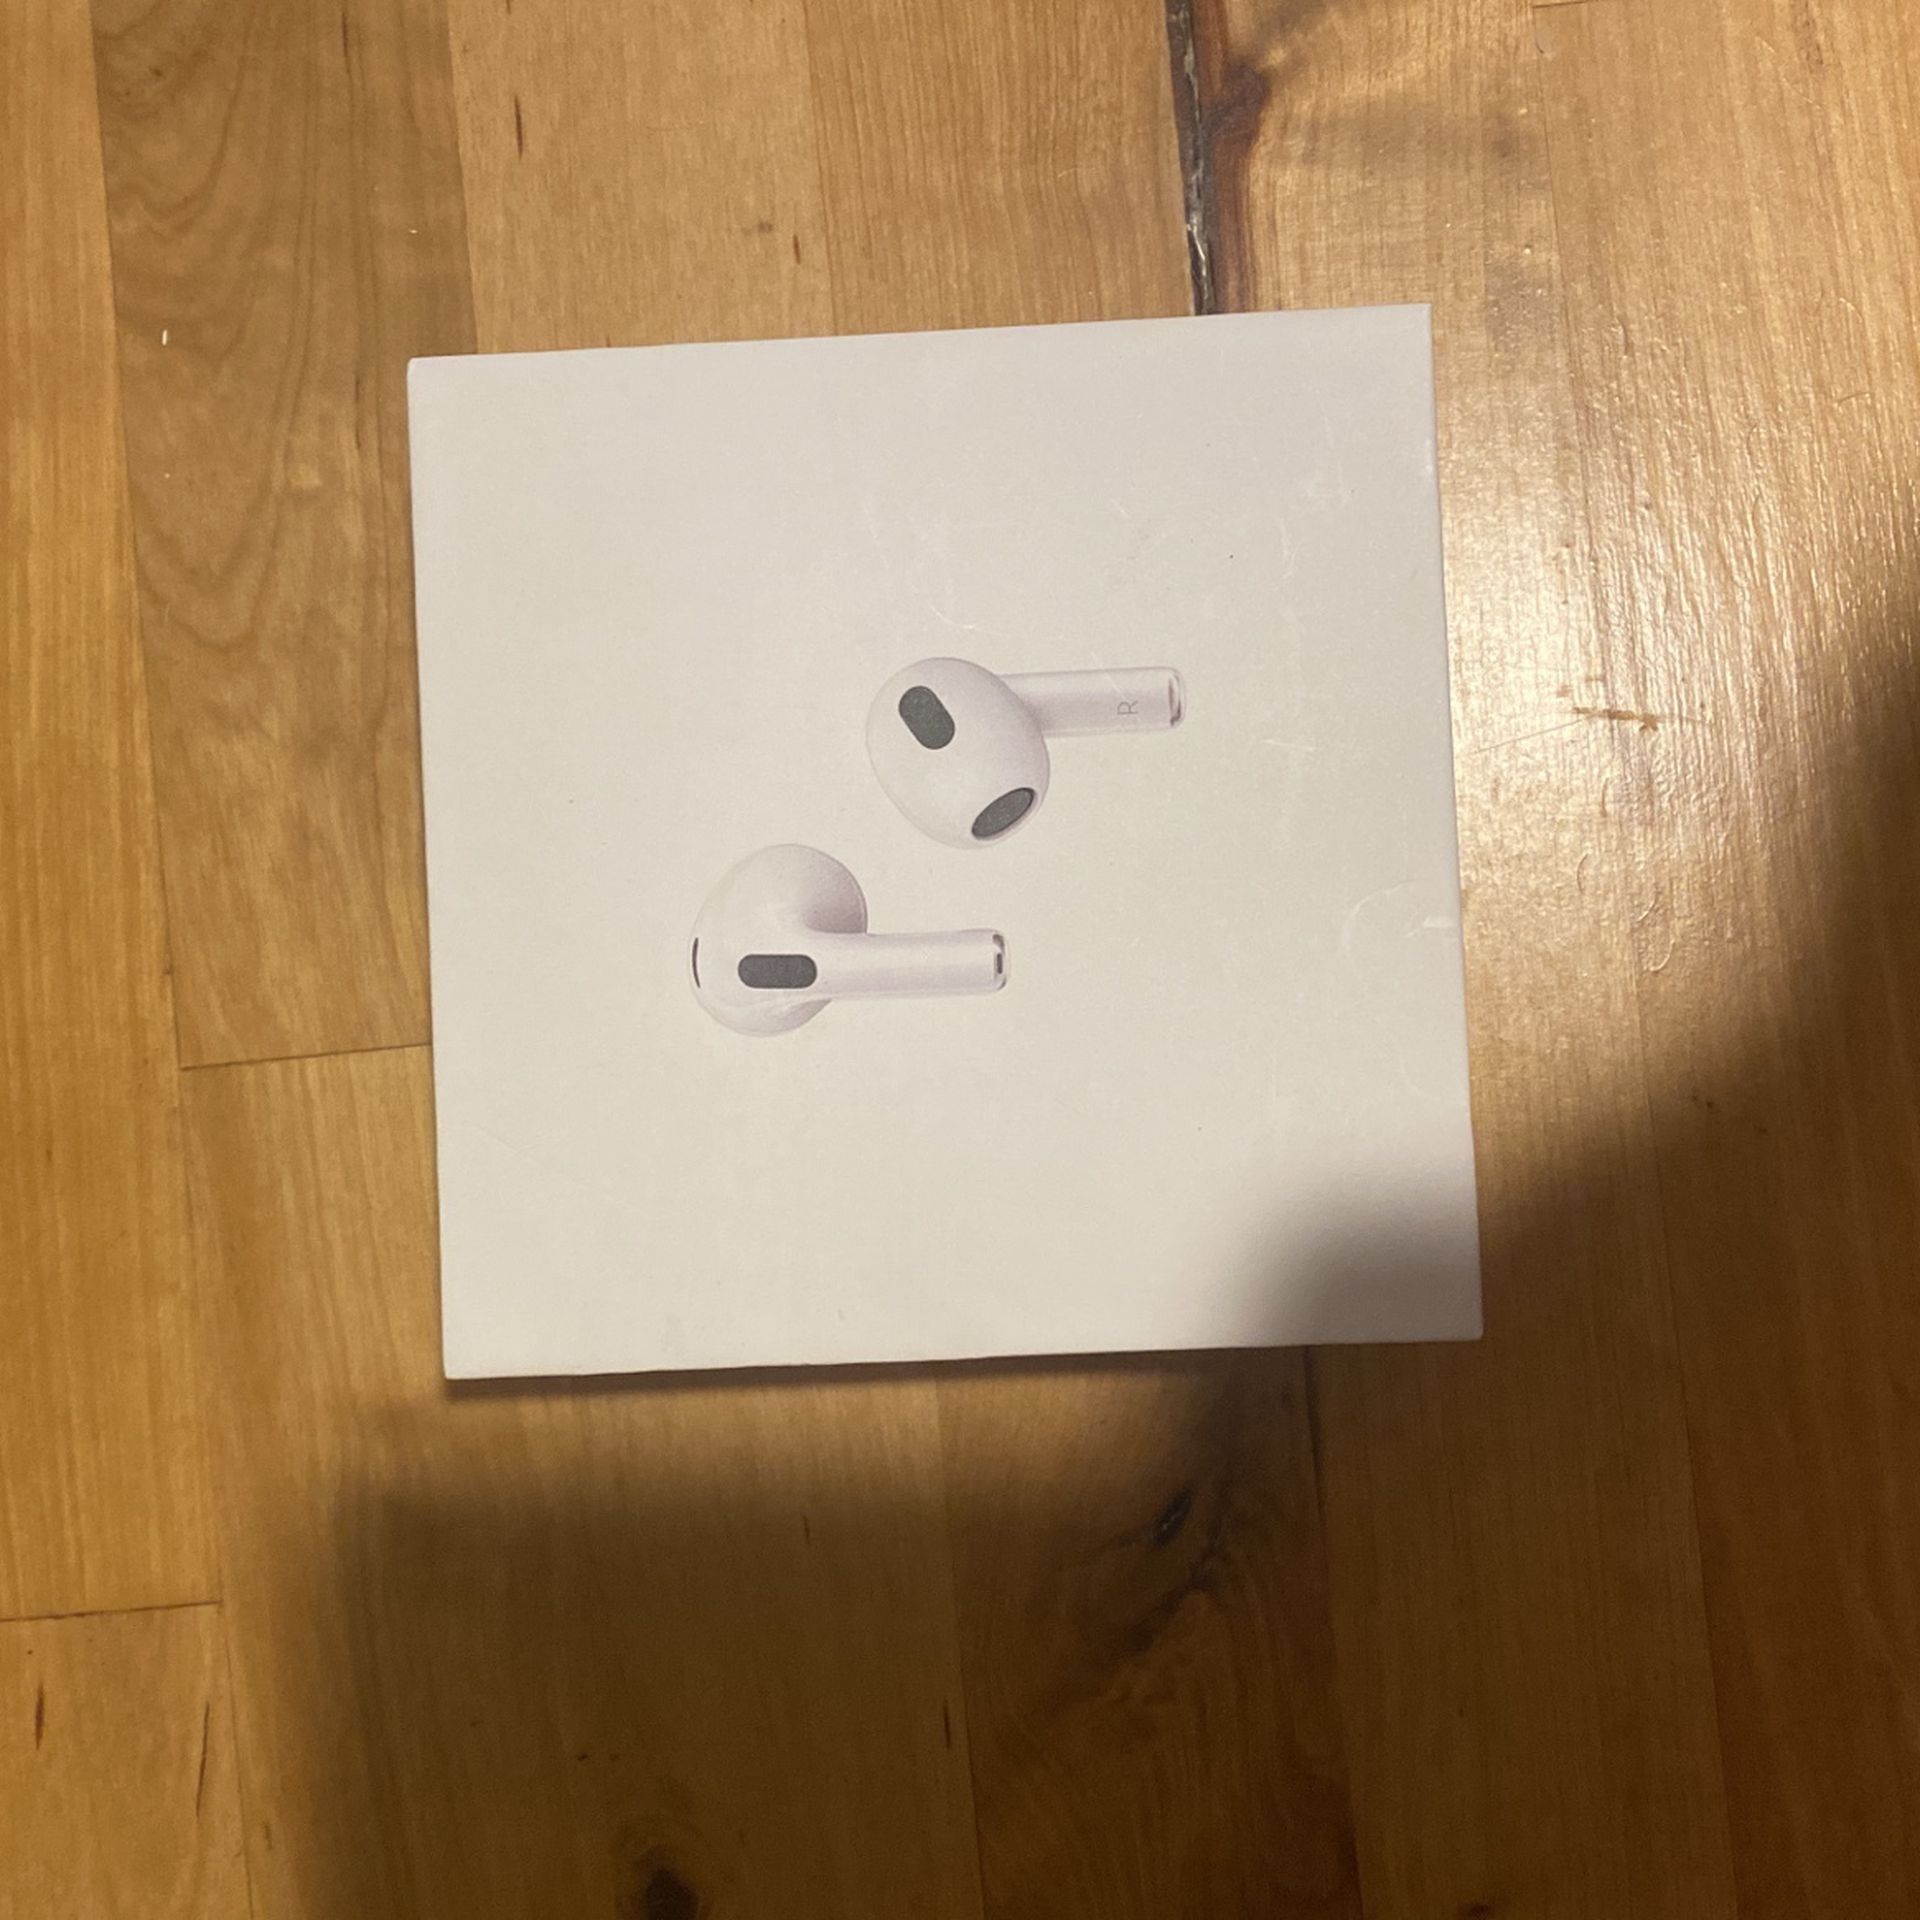 AirPods Charging Case **NO AIRPODS**